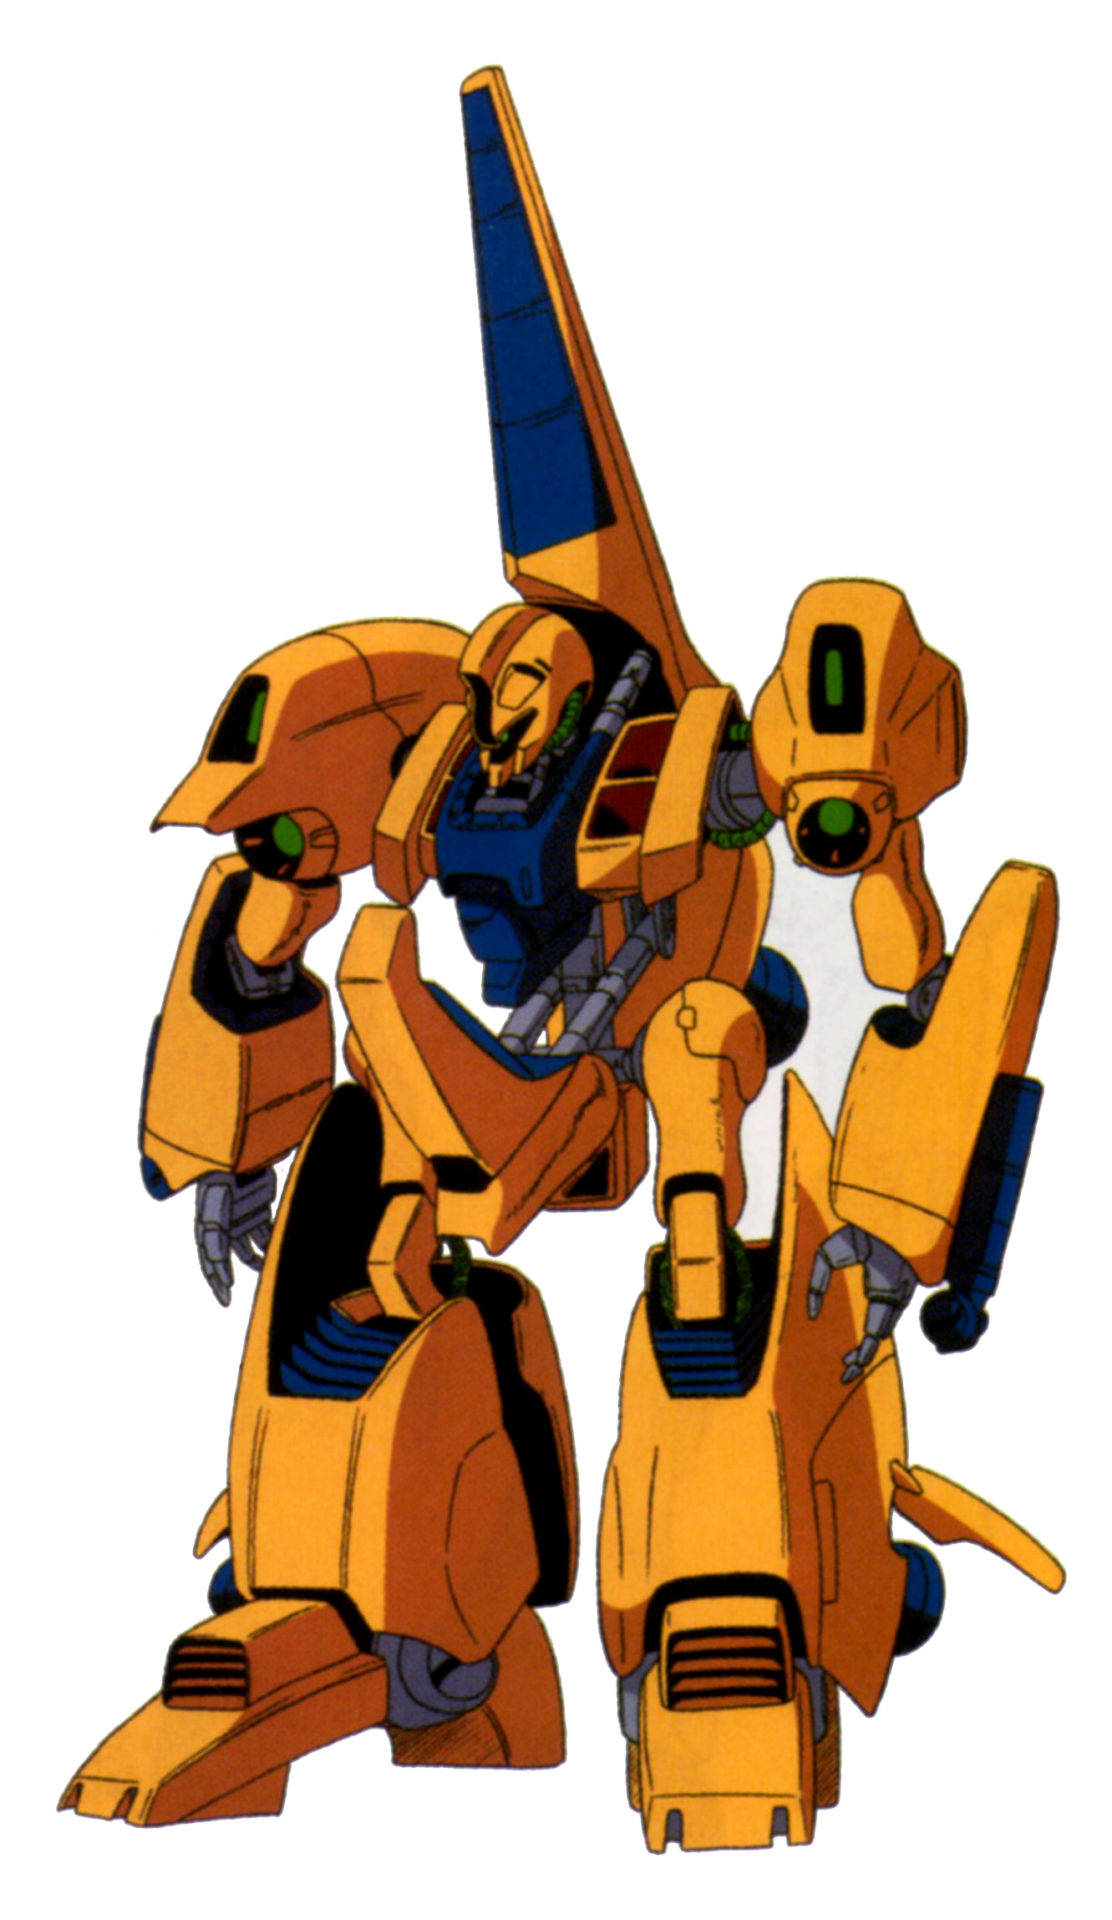 MSA-005 Methuss in mobile suit mode